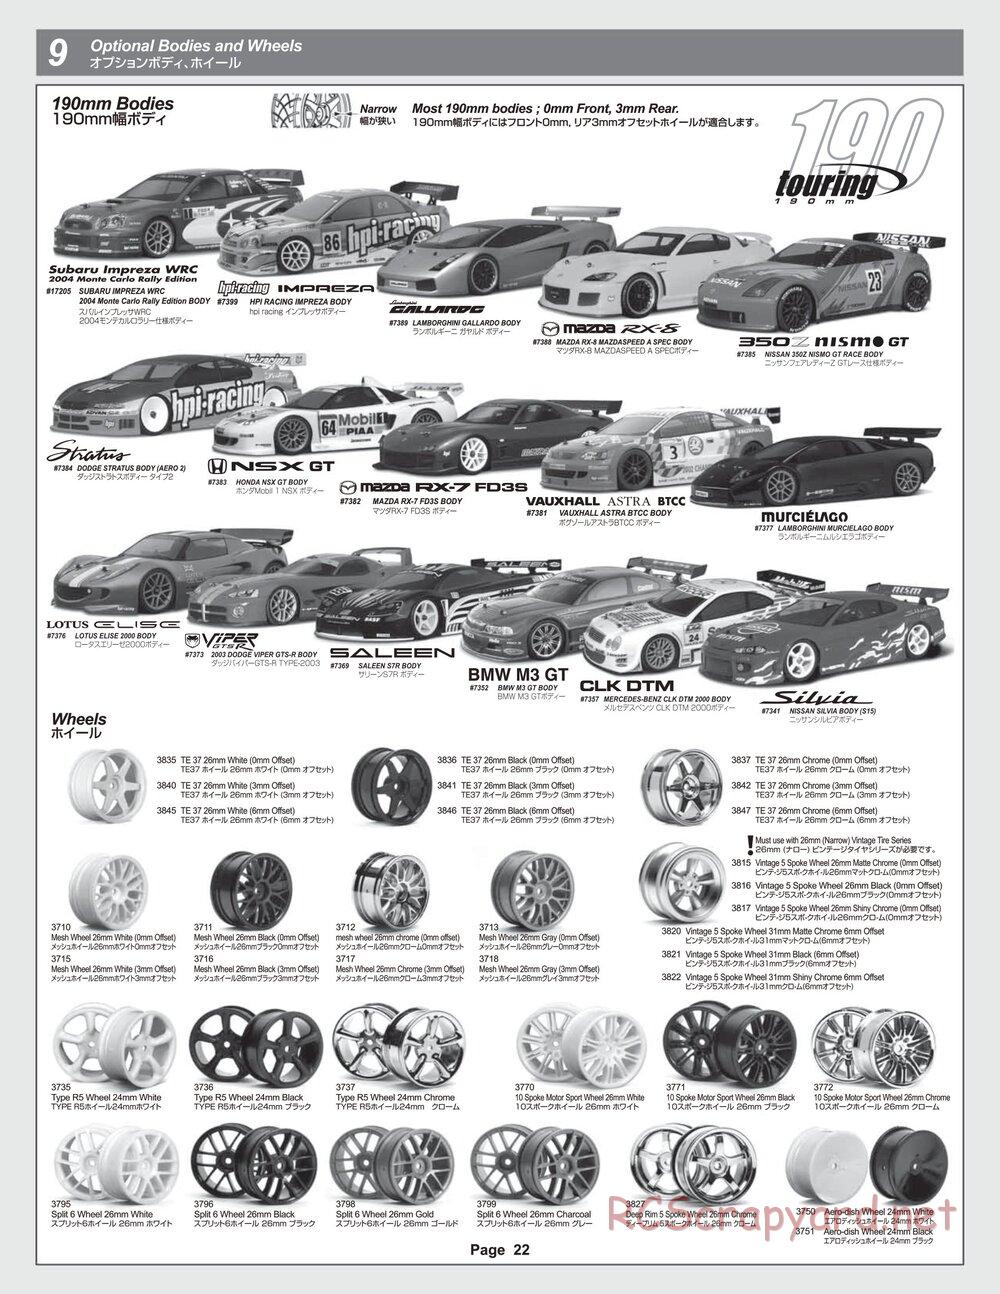 HPI - Sprint 2 RTR - Manual - Page 22